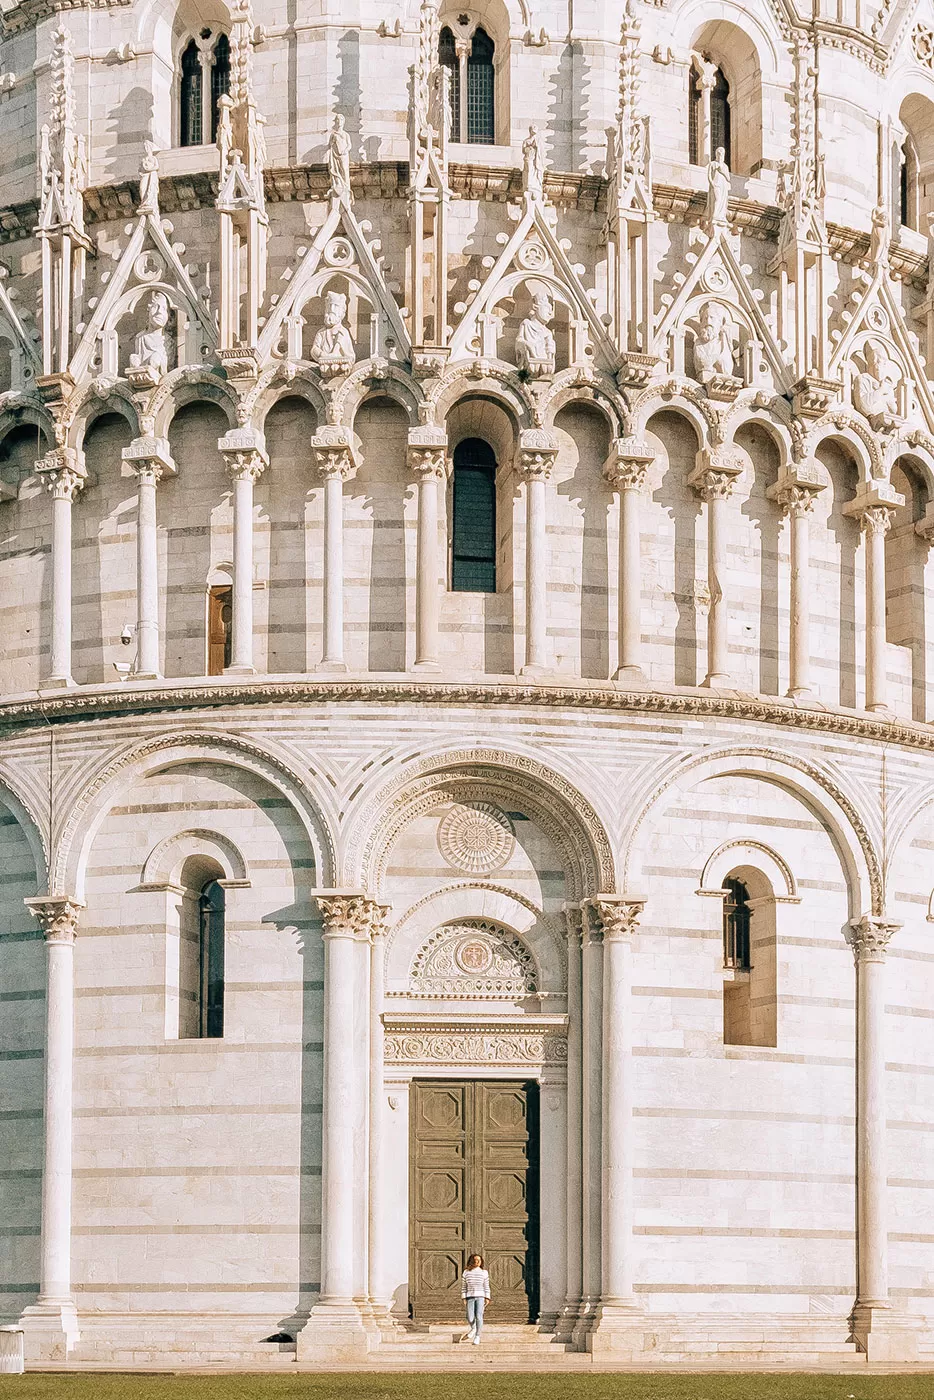 Things to do in Pisa Italy - Piazza dei Miracoli - Piazza del Duomo - Baptistery - Side entrance